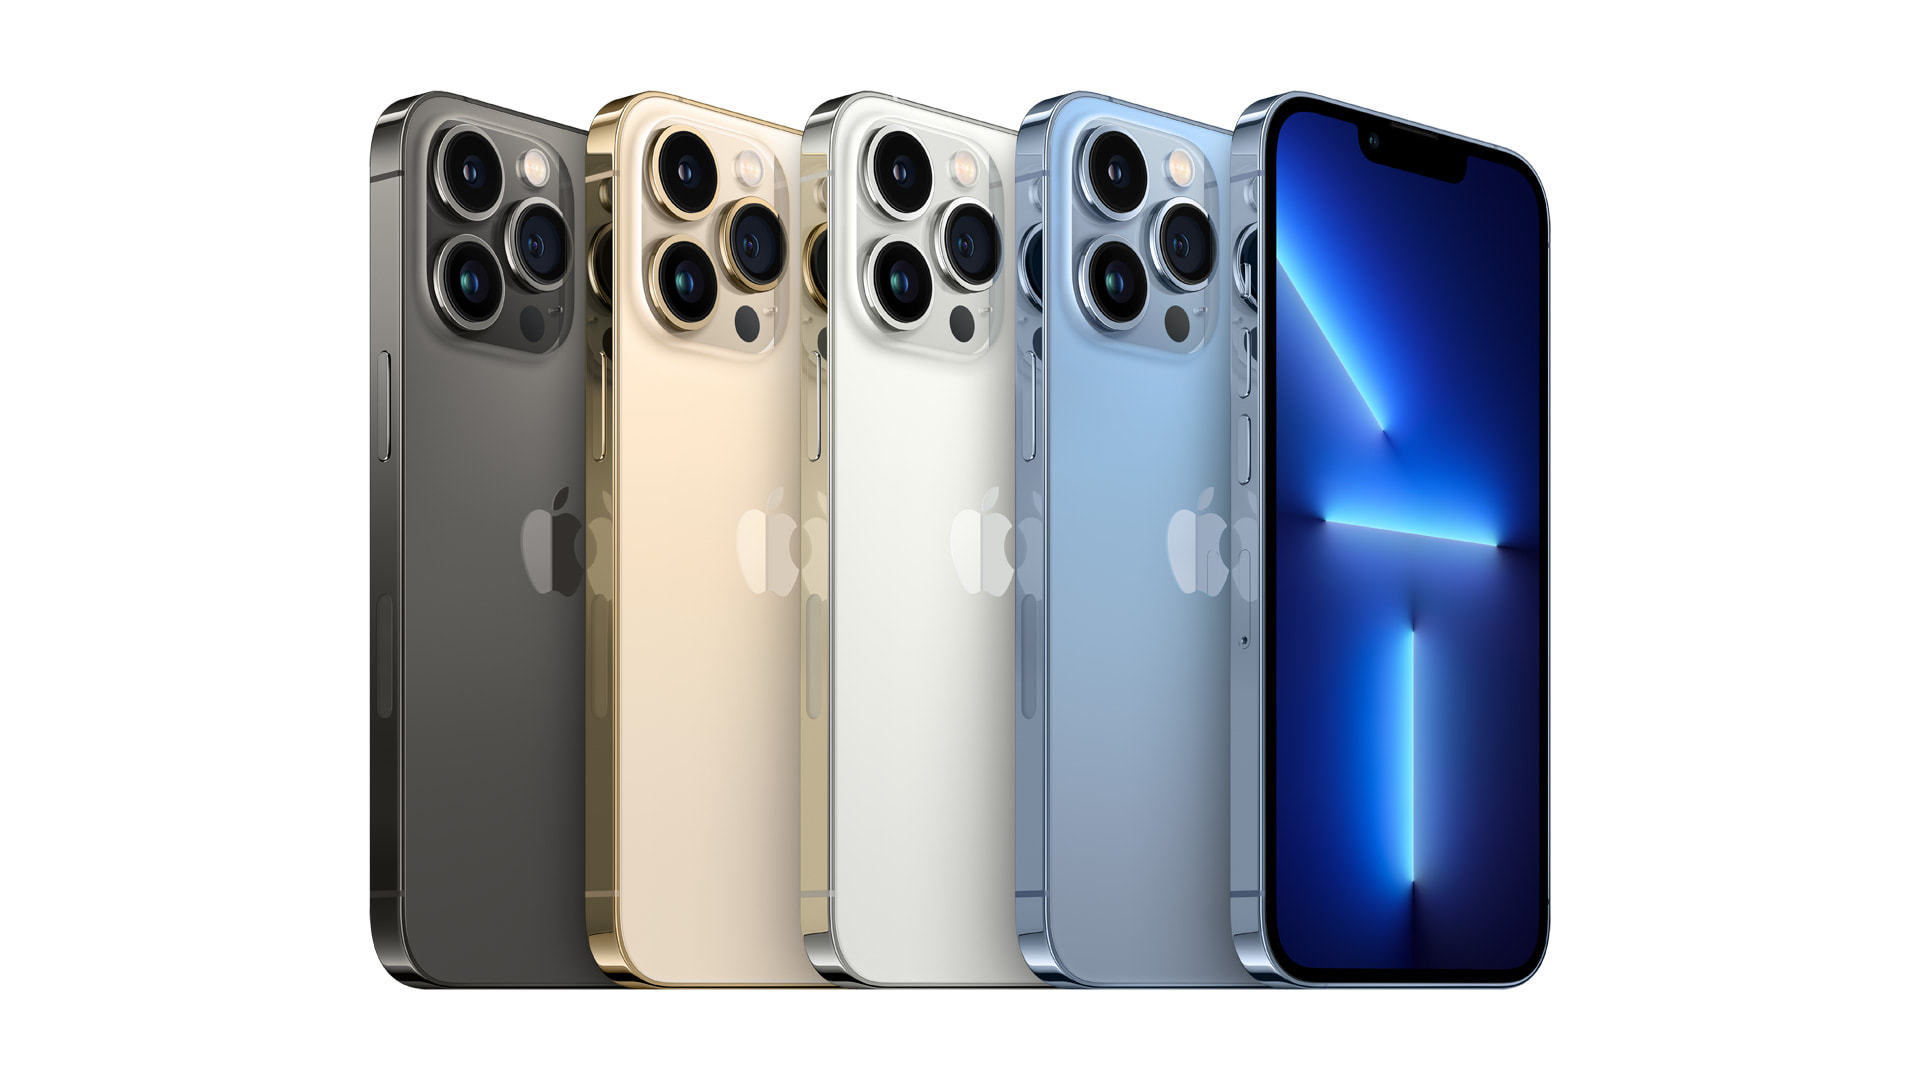 Xfinity Mobile and Comcast Business Mobile to offer all-new iPhone 13 Pro, iPhone 13 Pro Max, iPhone 13, iPhone 13 mini, iPad, and iPad mini with Orders